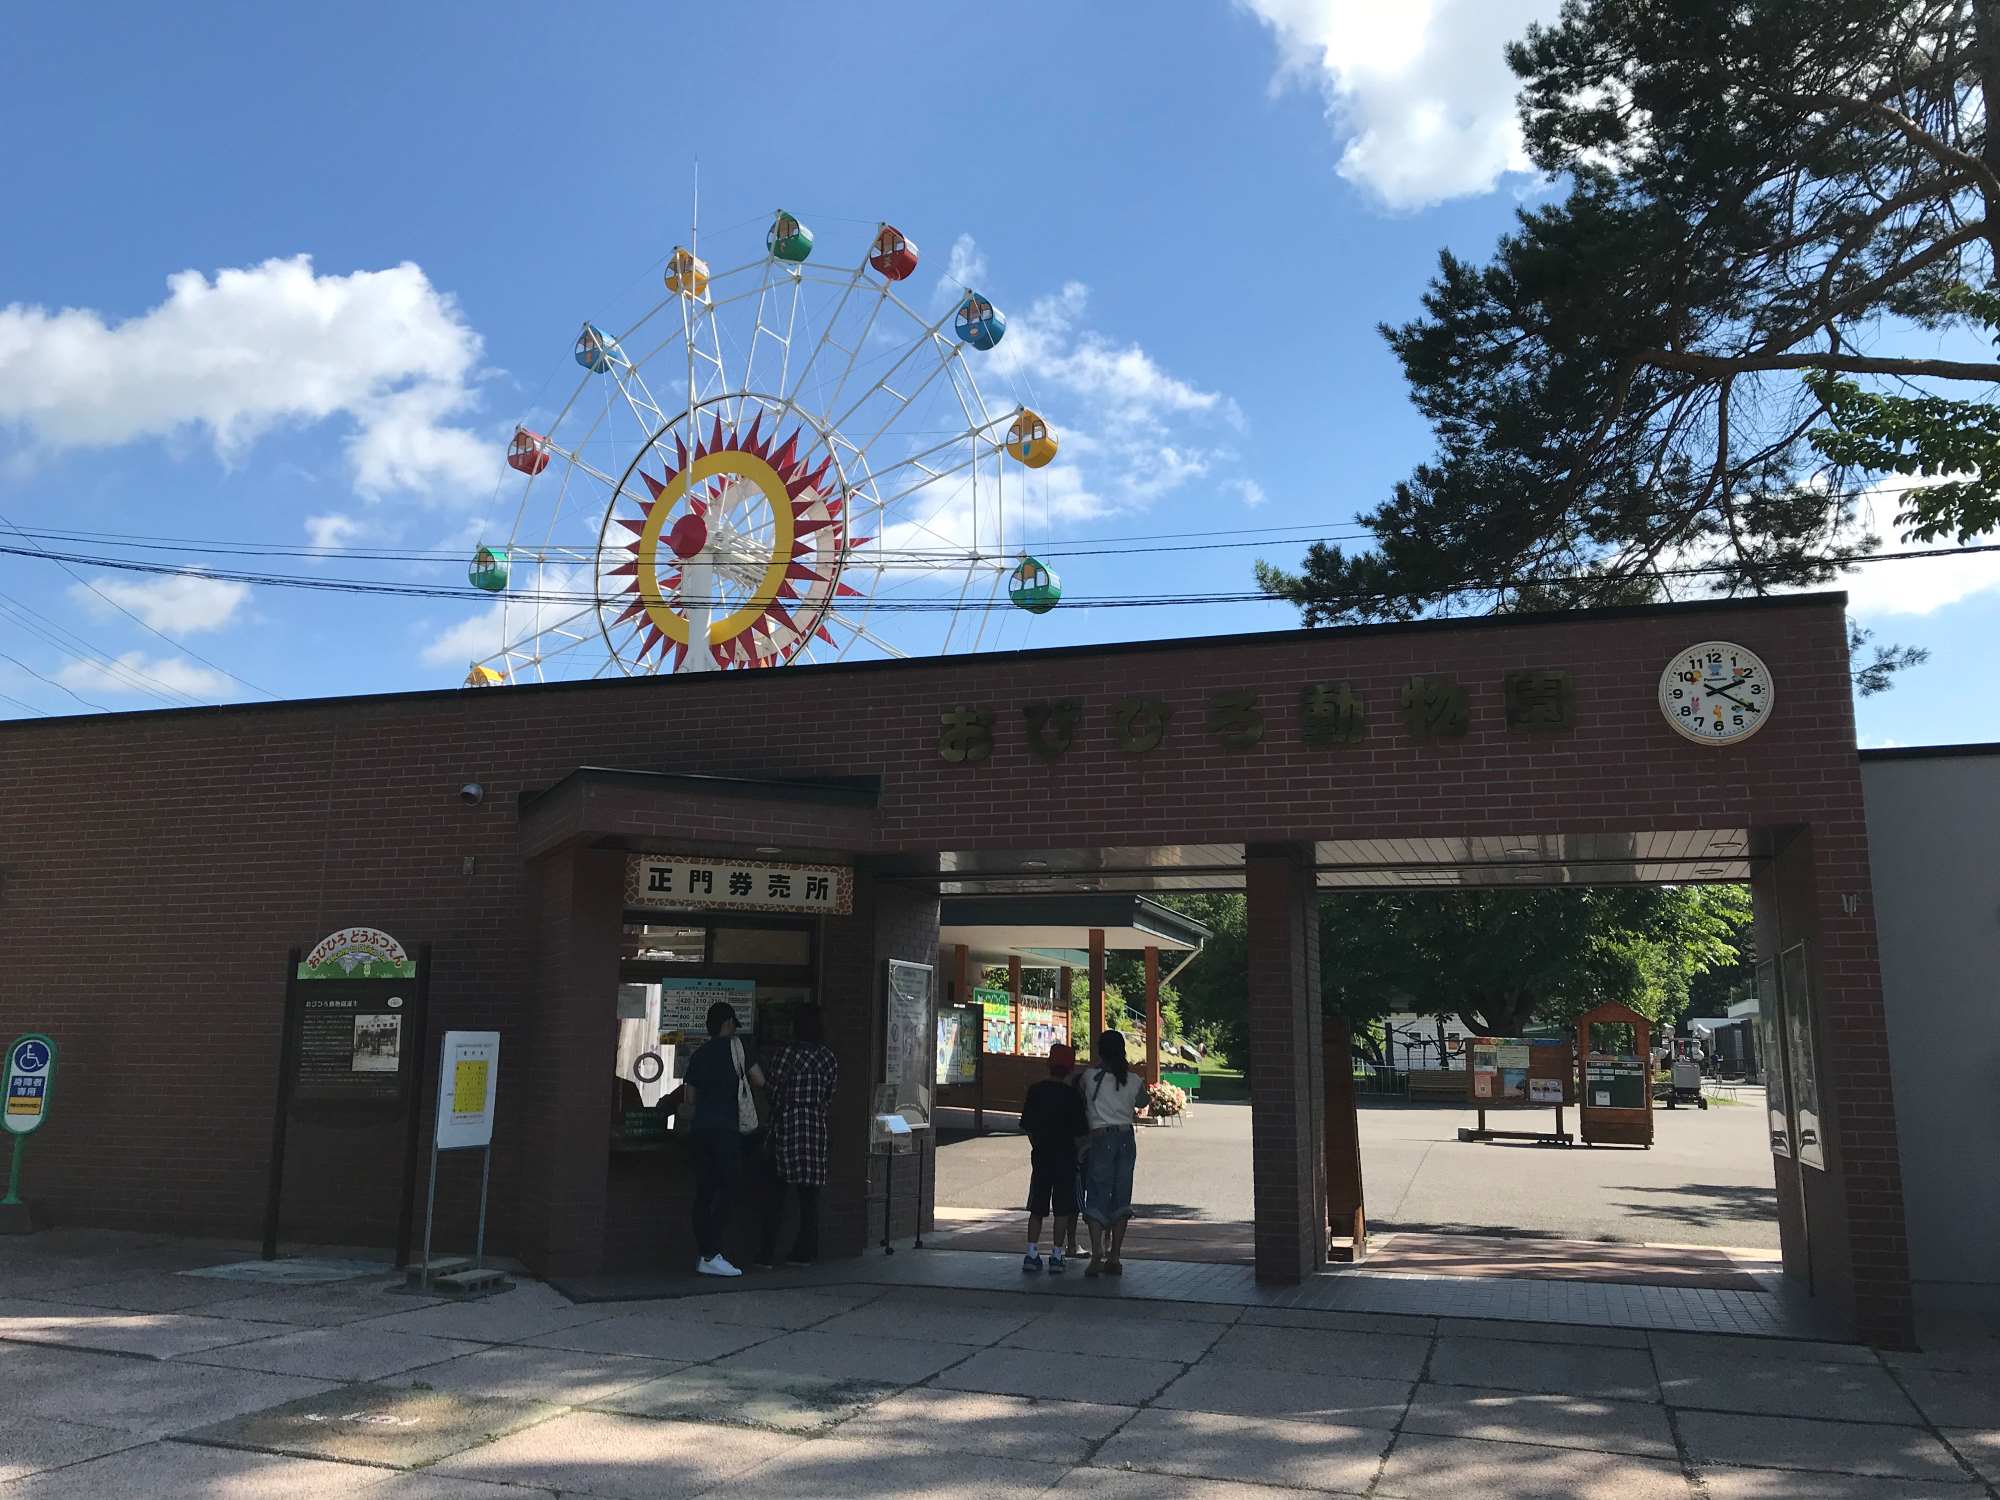 16-mind-blowing-facts-about-obihiro-zoo